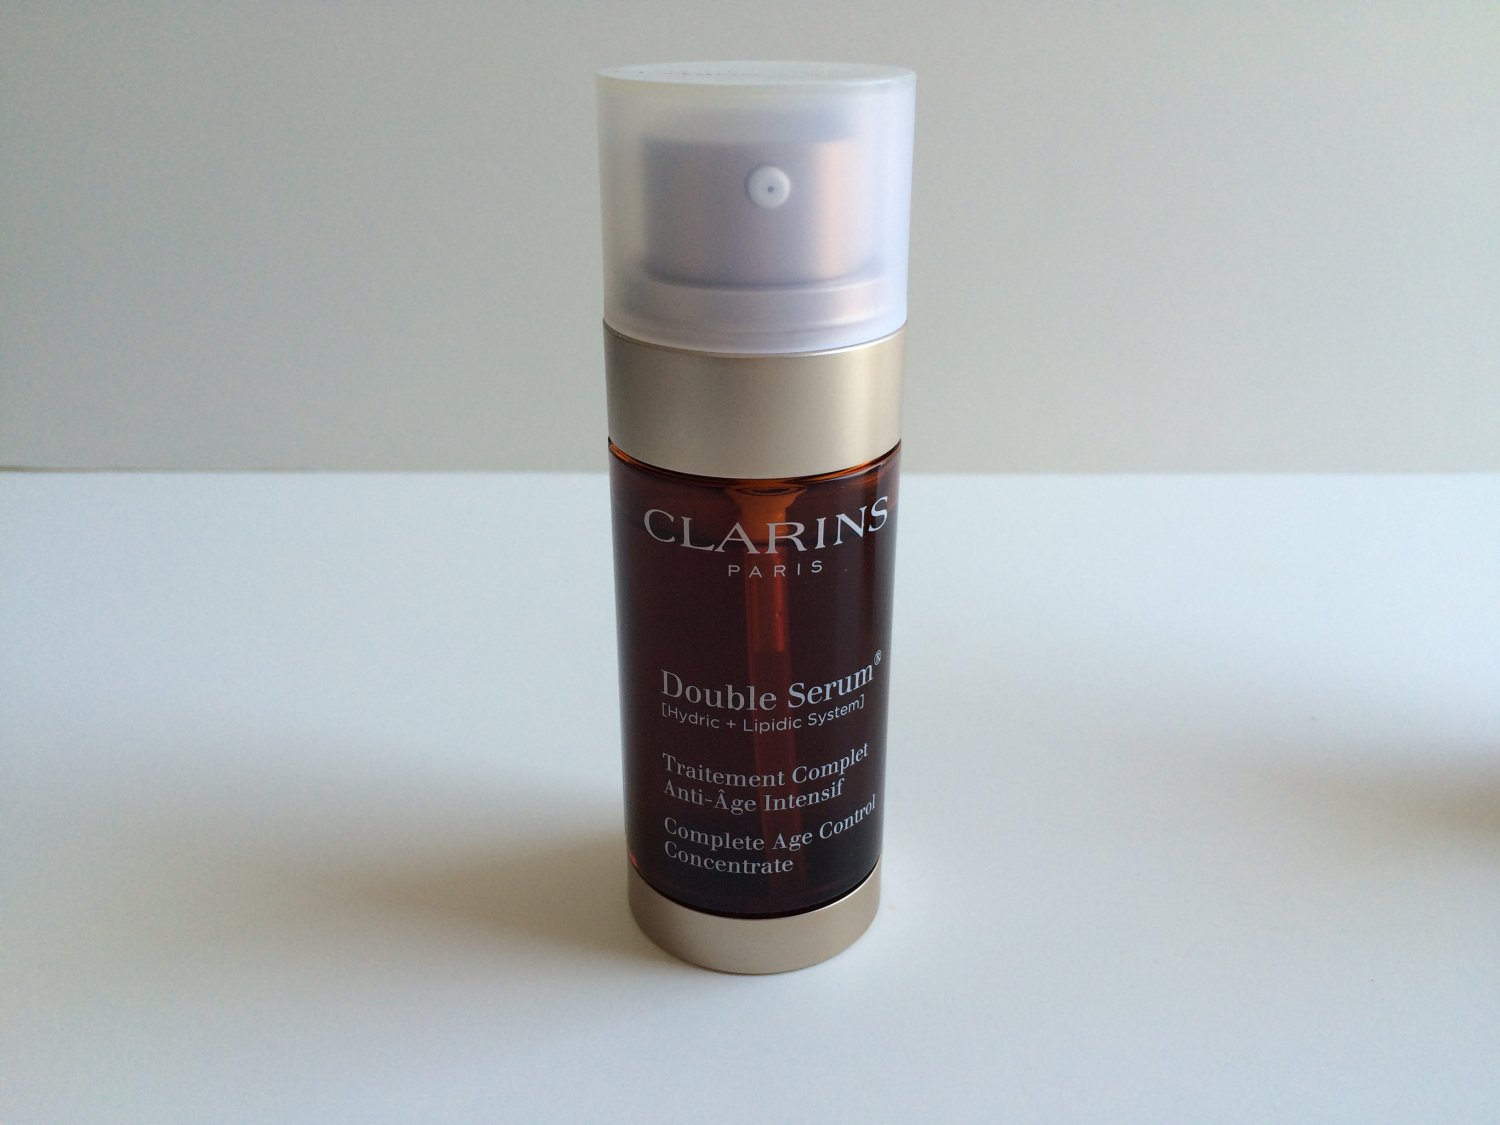 Clarins Double Serum Complete Age Control Concentrate (Brand New, NO Box) 1.0 oz